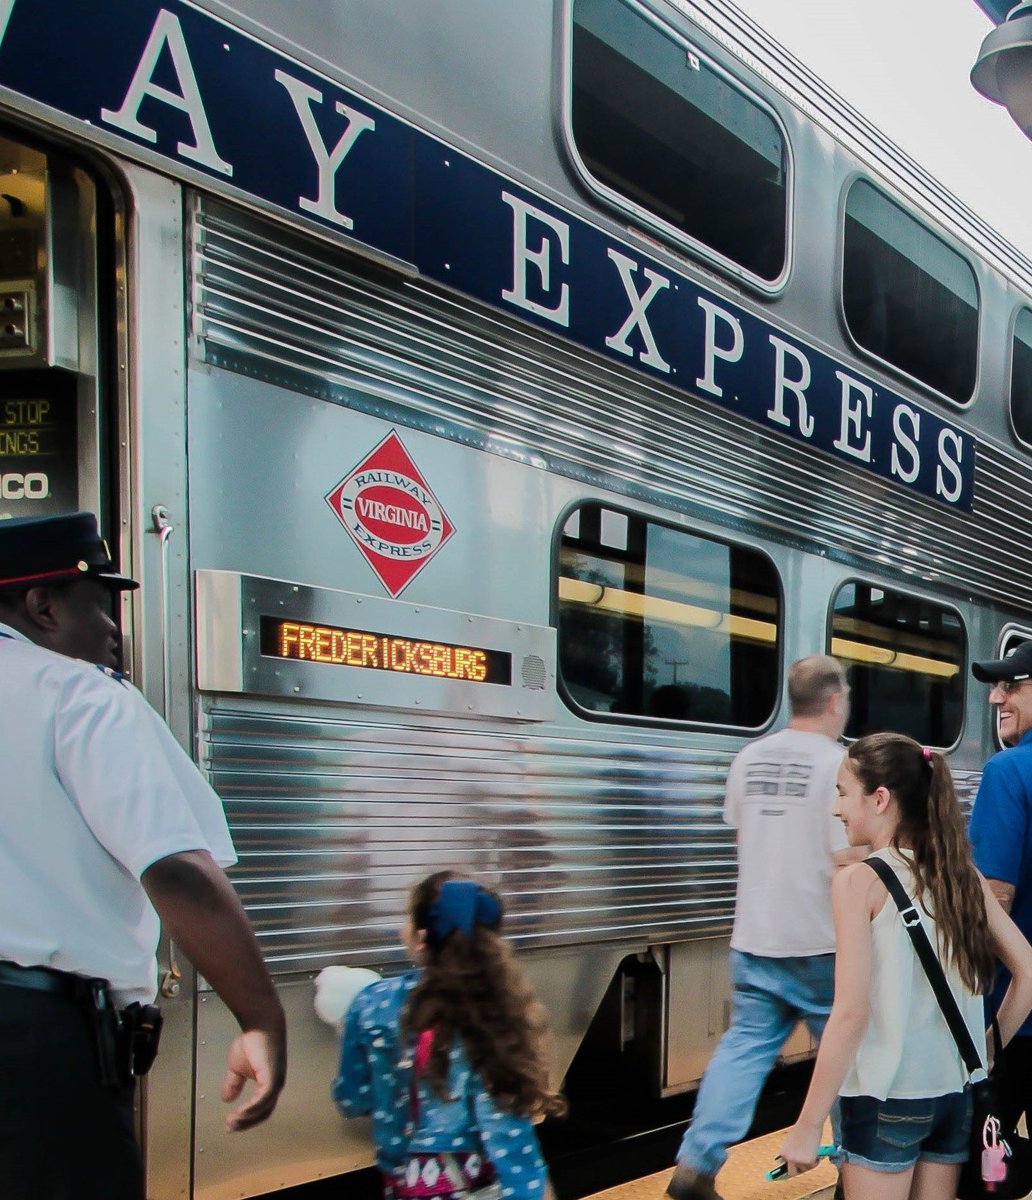 Your workday starts with your daily commute. Tomorrow for Take Our Daughters and Sons to Work Day, VRE will allow school-age children accompanied by a paying adult to ride the train for free! Be safe with kids around railroads. #IamRail #VREtrip #TakeOurChildrenToWorkDay # TYKTWD